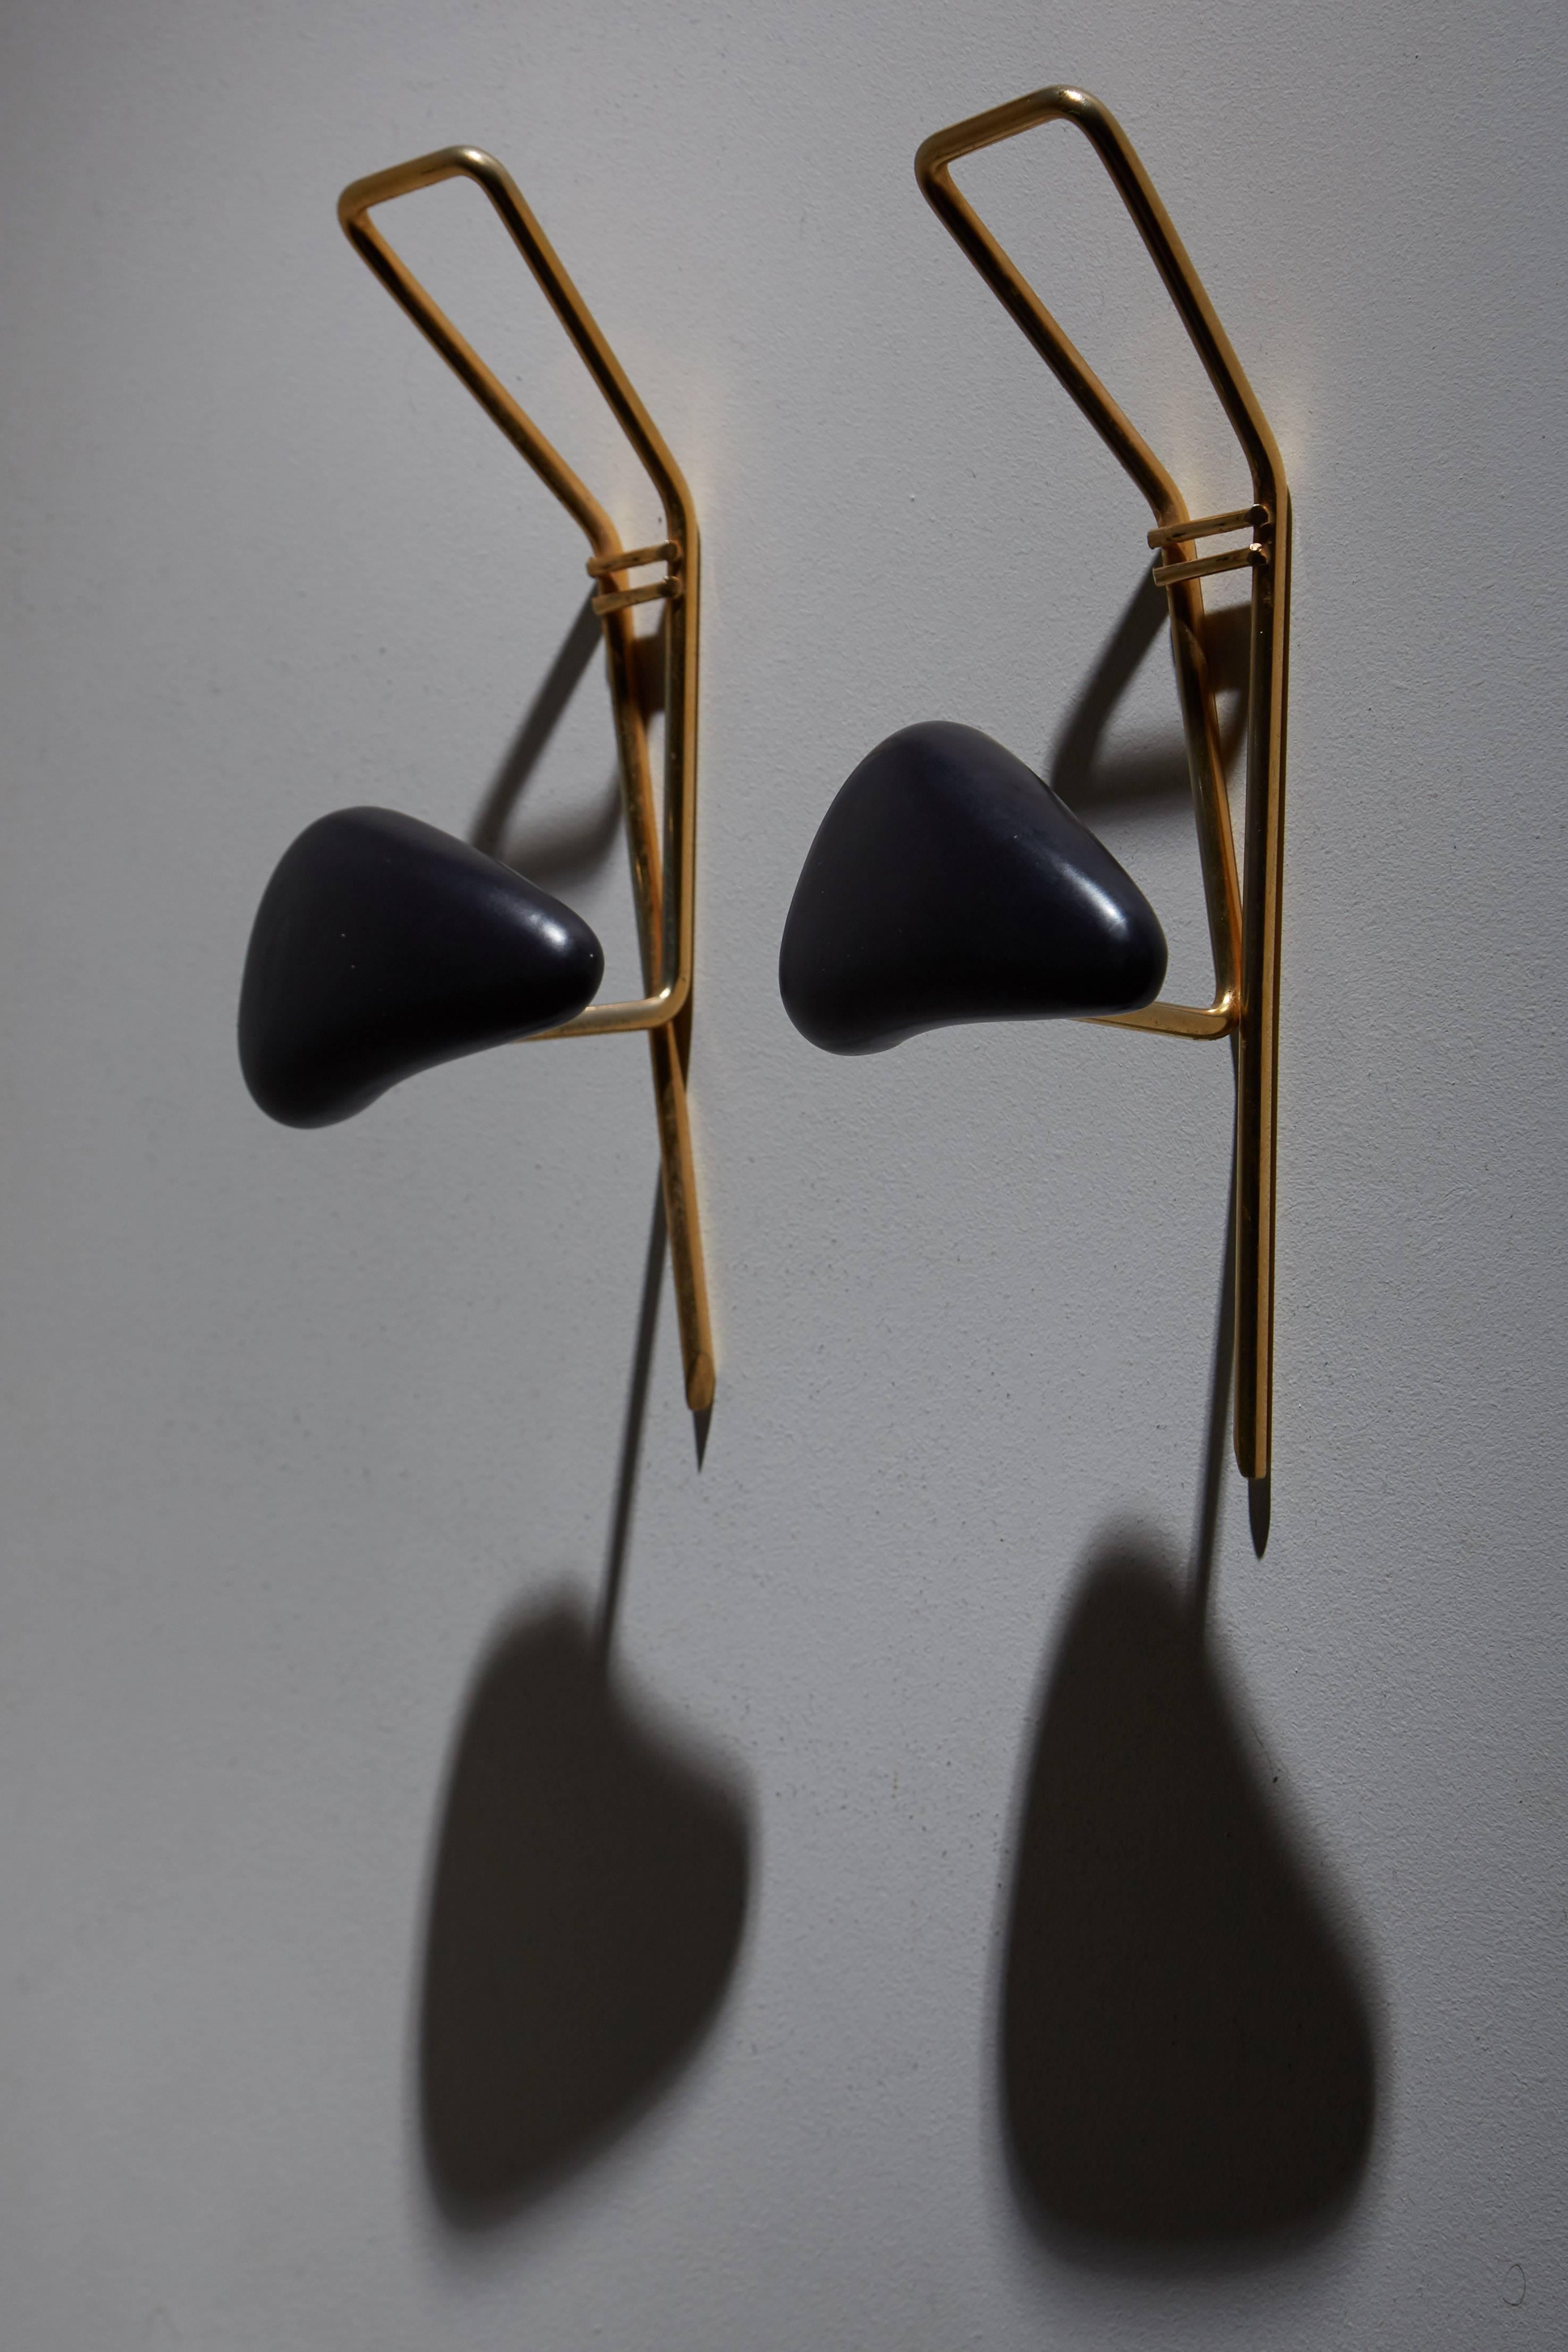 French Pair of Coat Racks by Georges Jouve for Marcel Asselbur